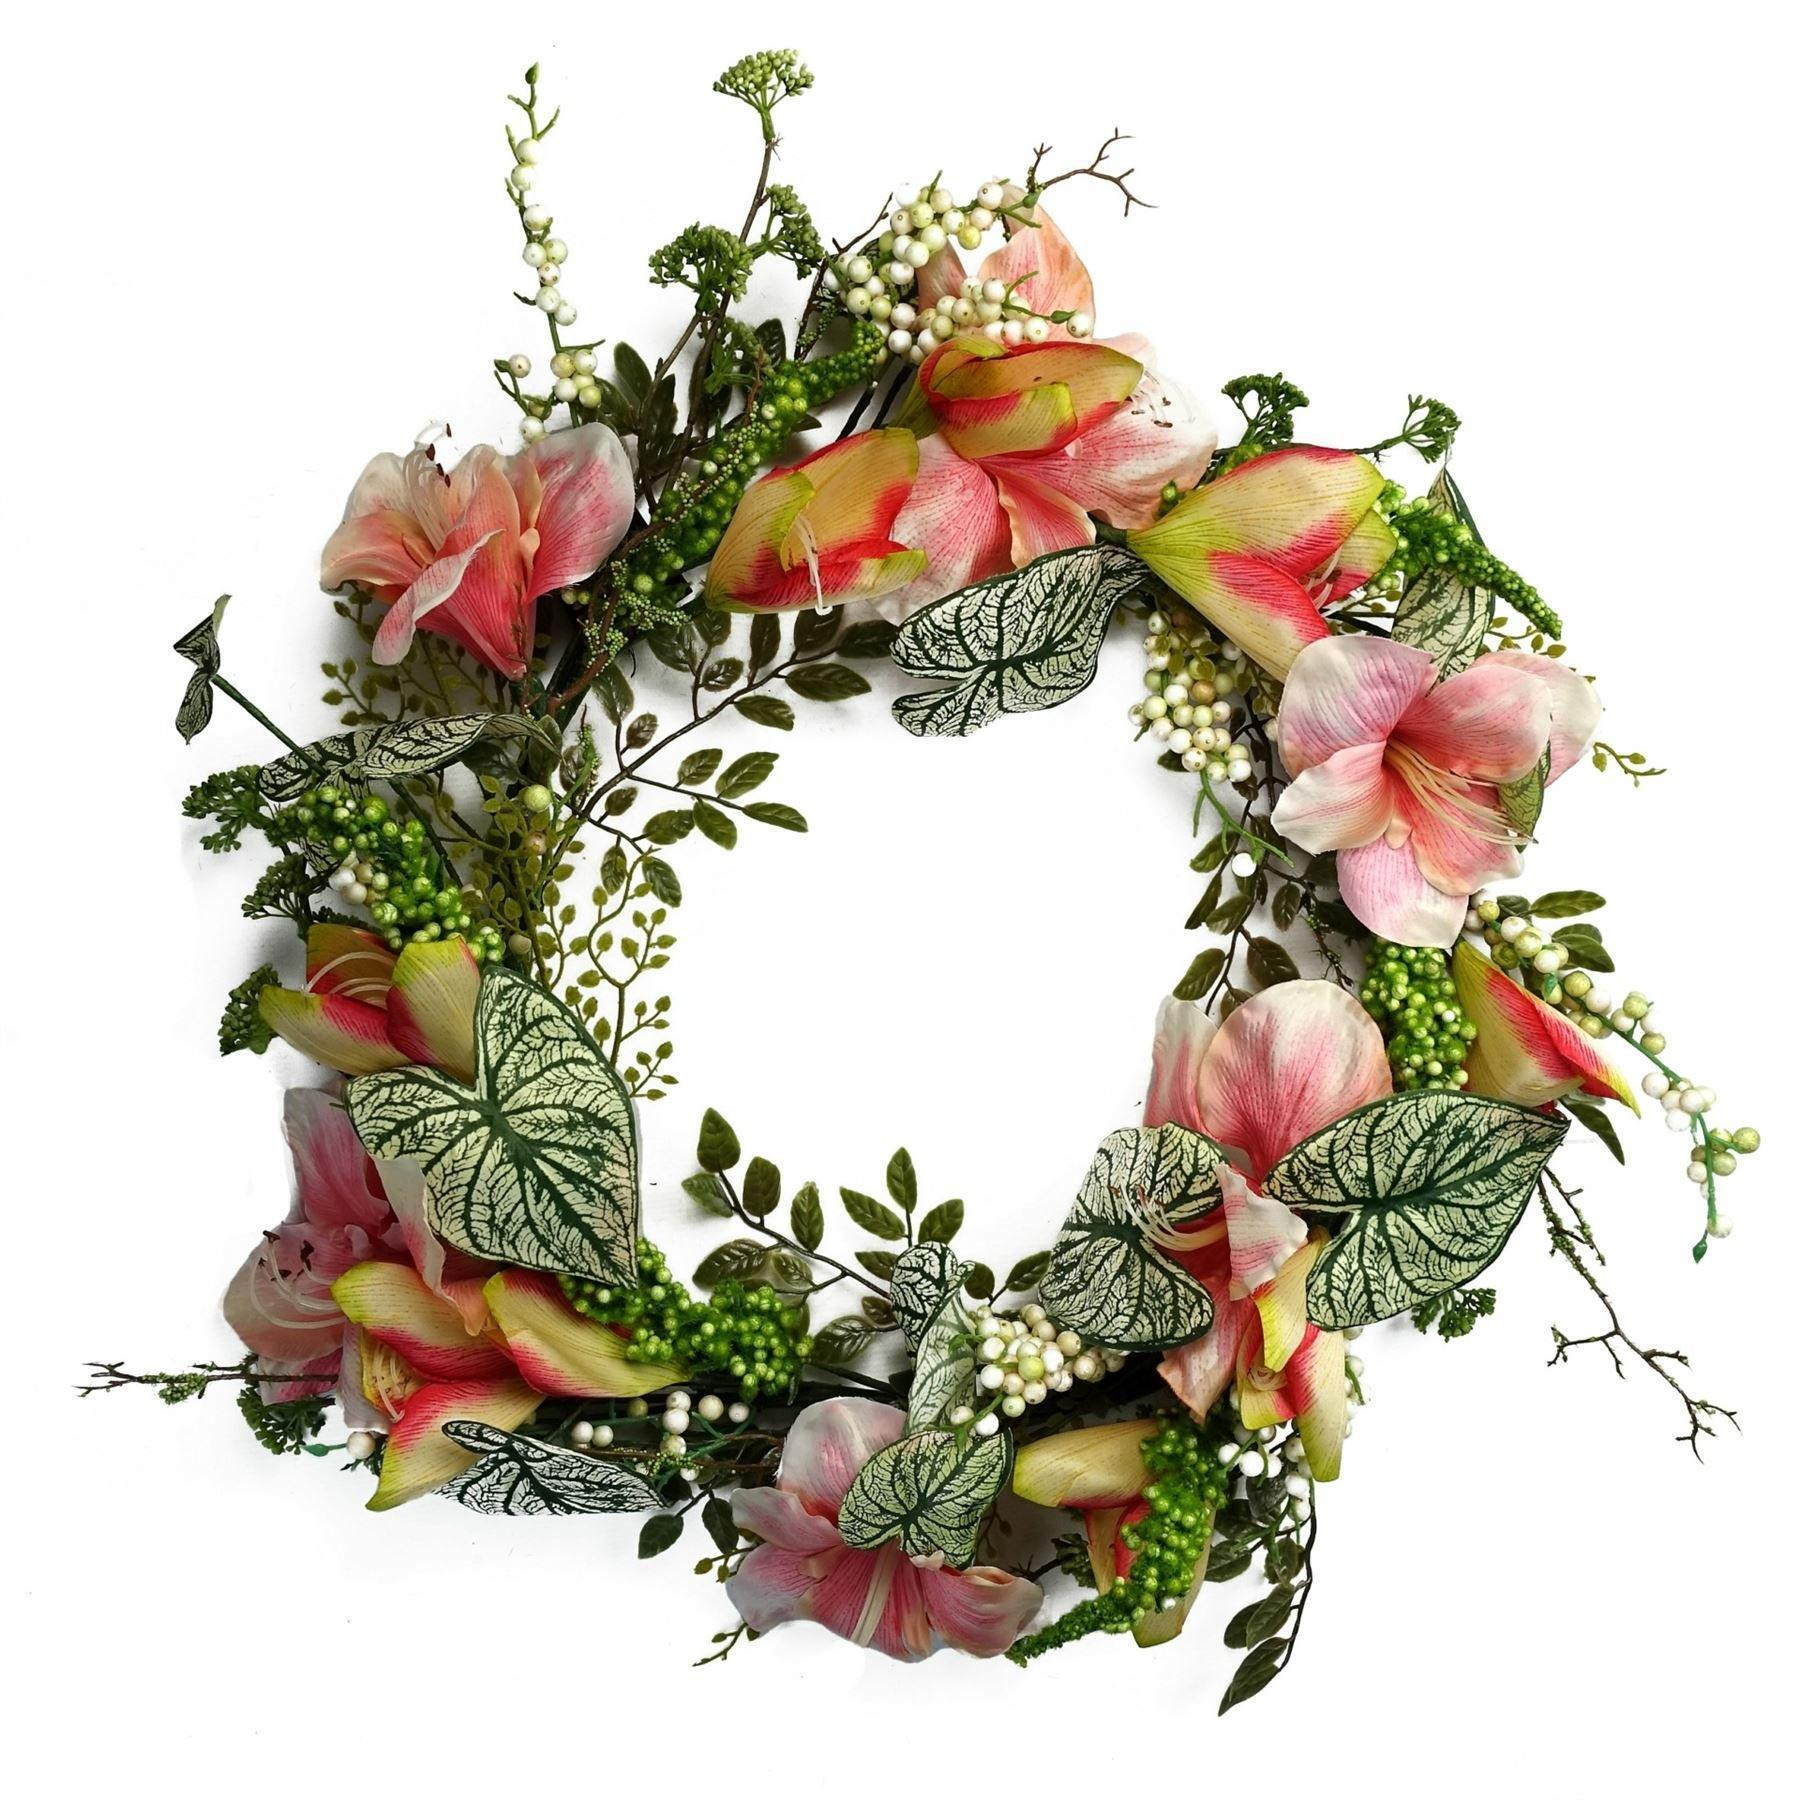 60cm Artificial Pink Lily Flower Wreath - image 1